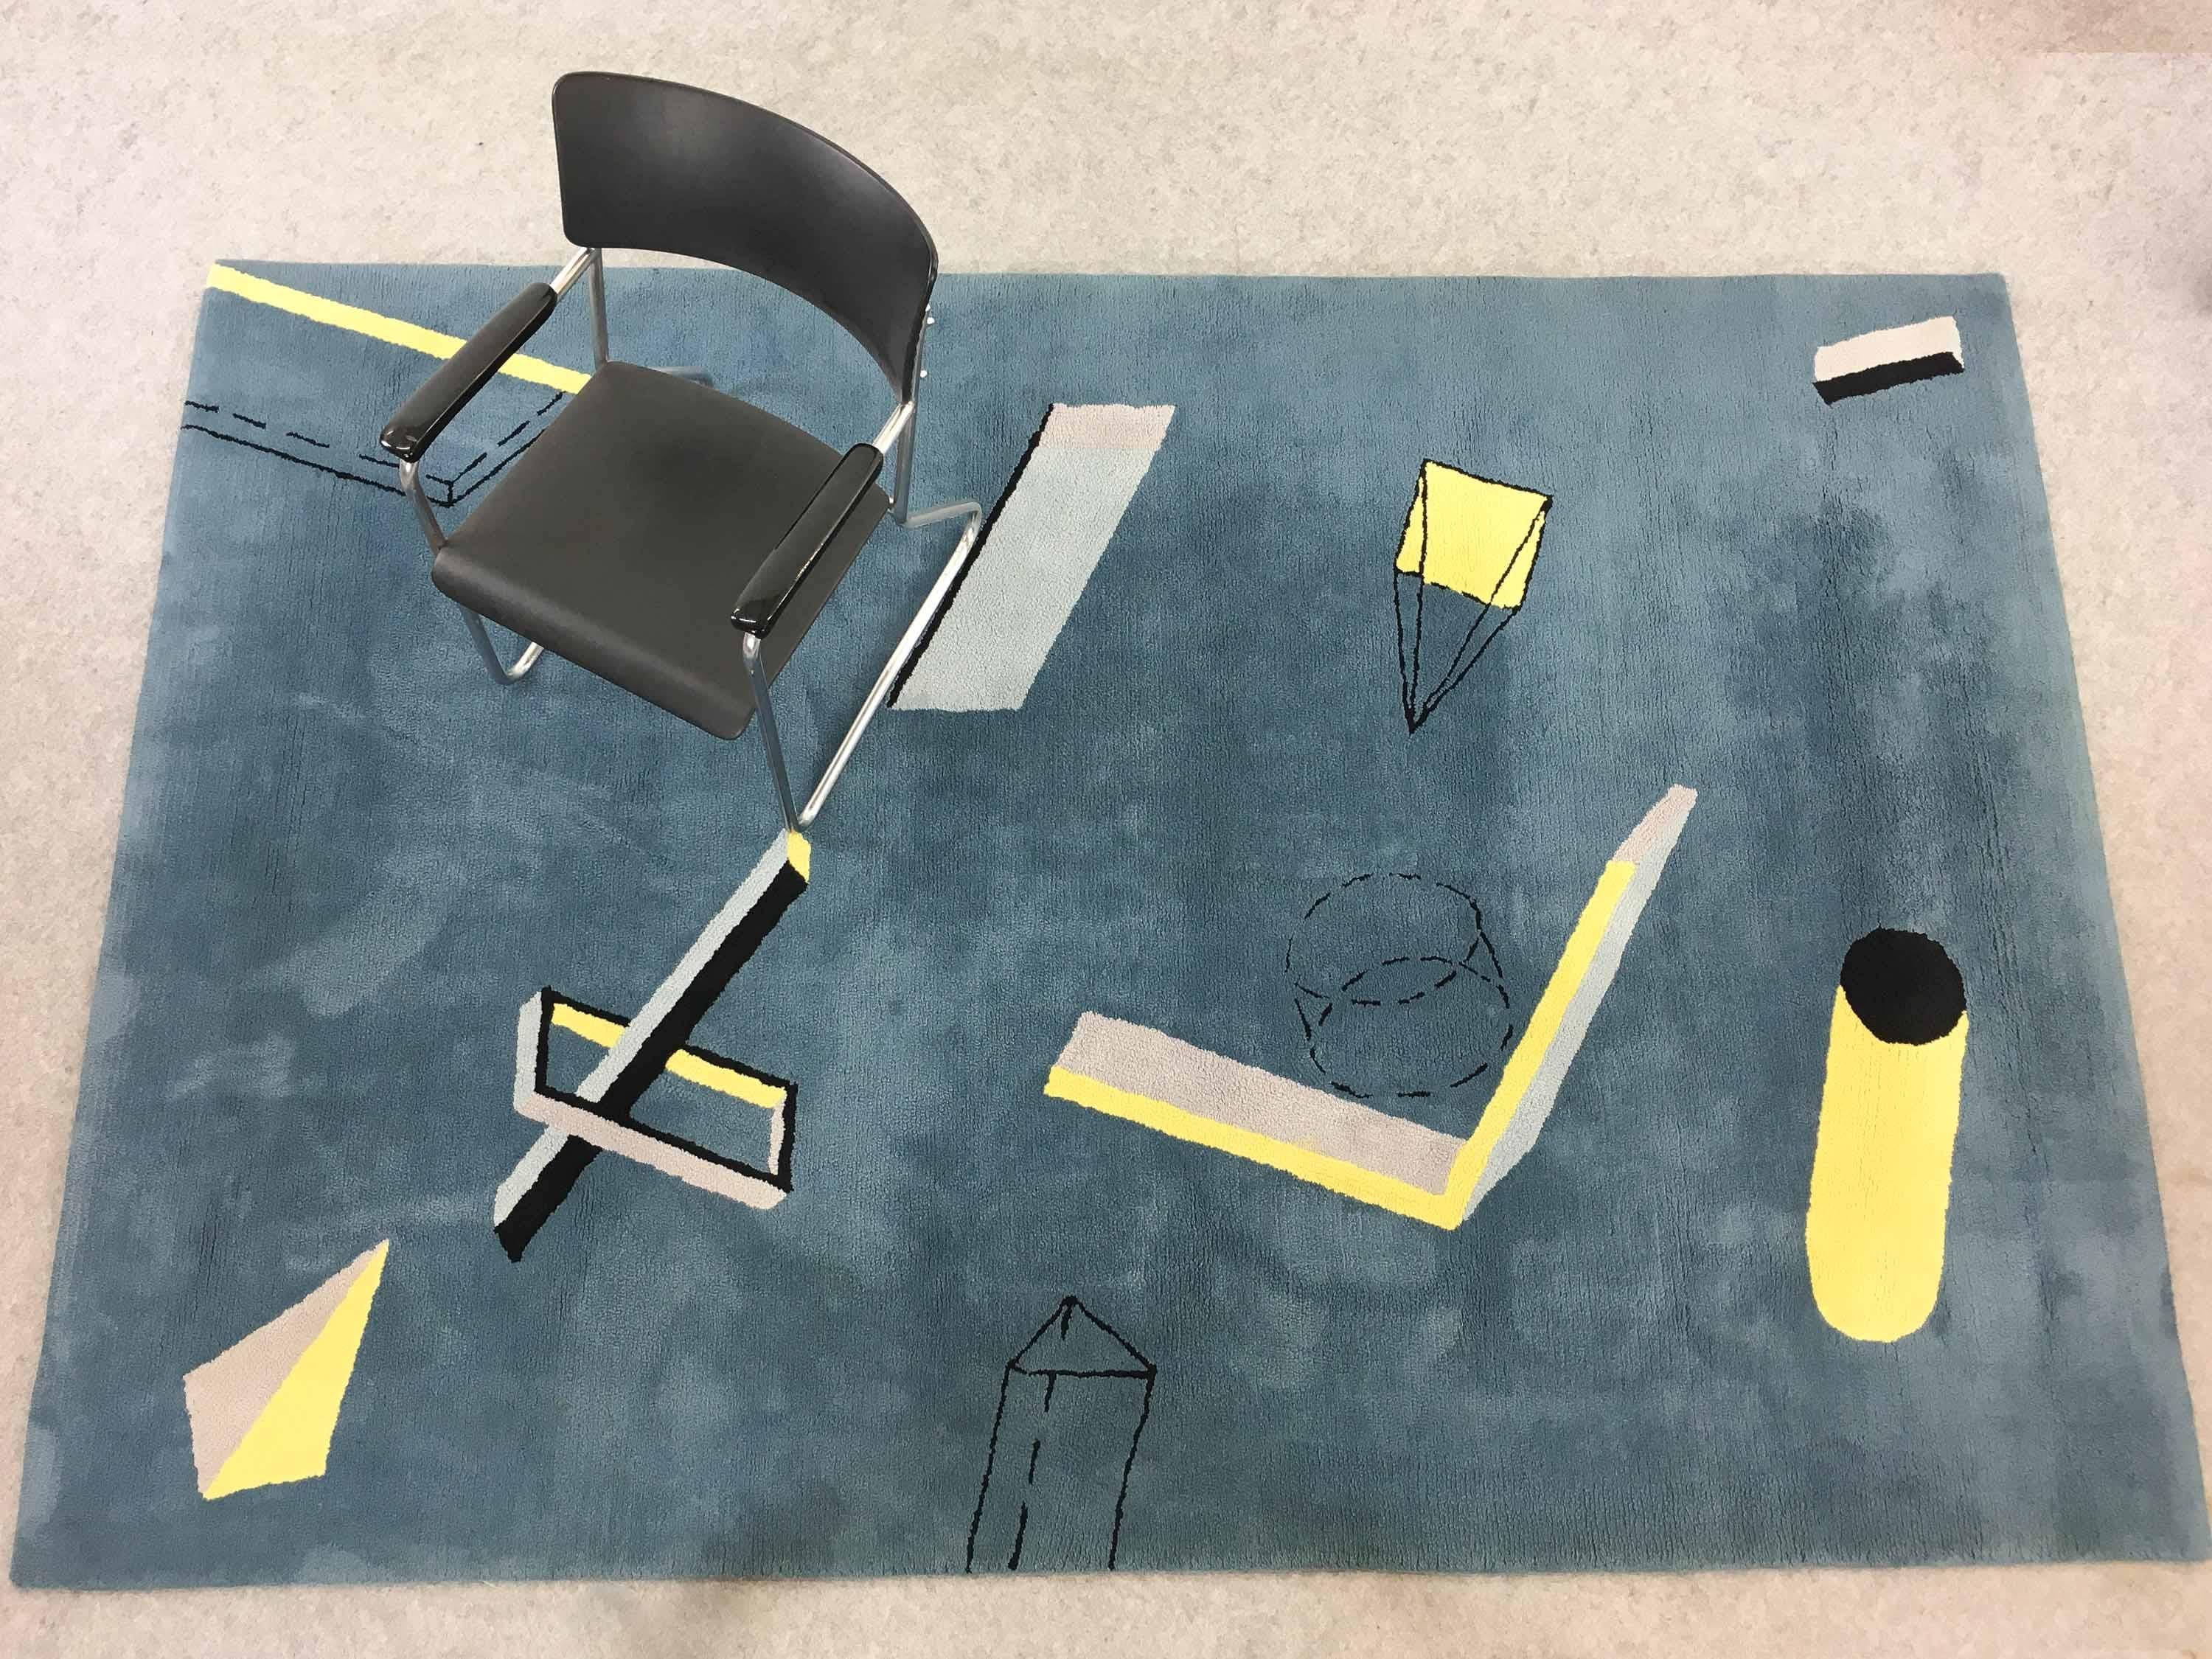 Bauhaus Memphis Art Architectural Geometric Wool Carpet/Rug, Blue Yellow Grey  In Good Condition For Sale In Halle, DE